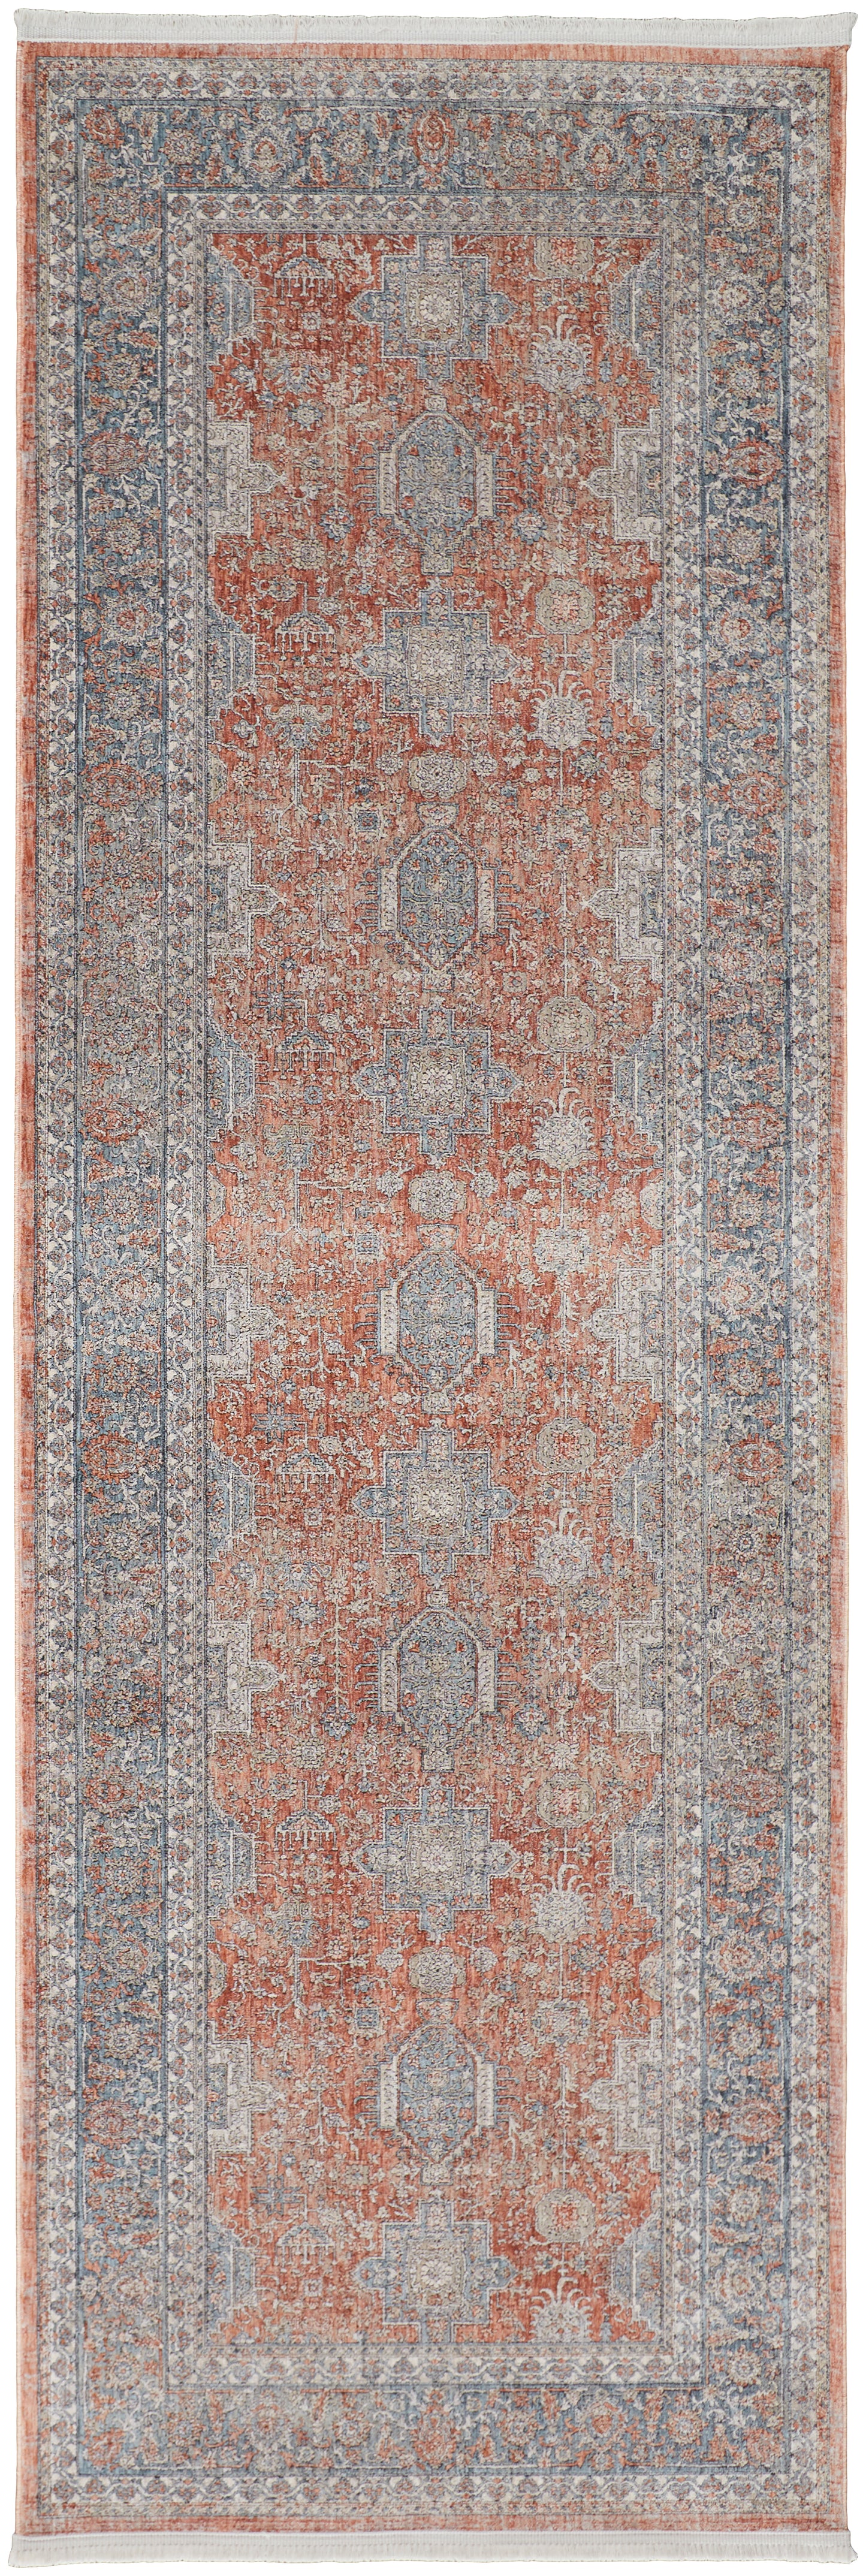 Marquette 3761F Machine Made Synthetic Blend Indoor Area Rug by Feizy Rugs